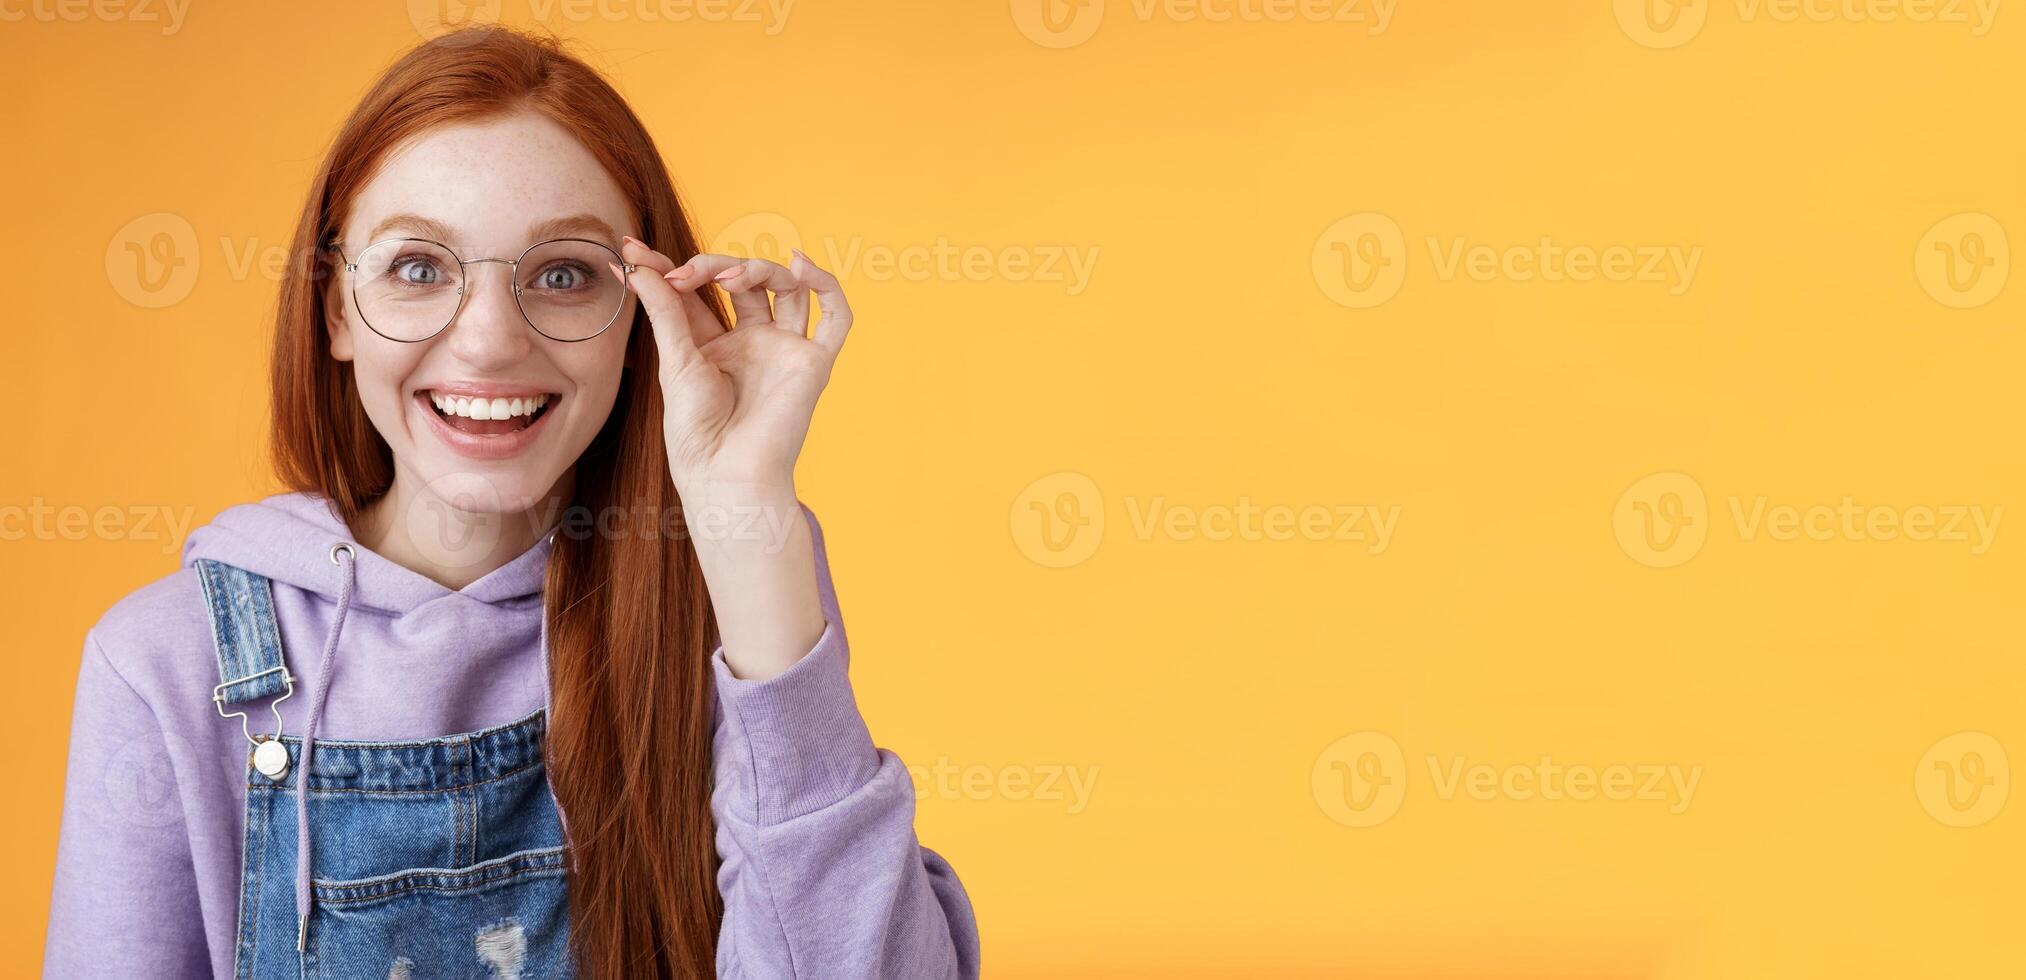 Happy enthusiastic young redhead girl amused find out excellent place celebrate b-day standing joyful excited touch glasses smiling broadly white teeth grinning rejoicing surprised, orange background photo